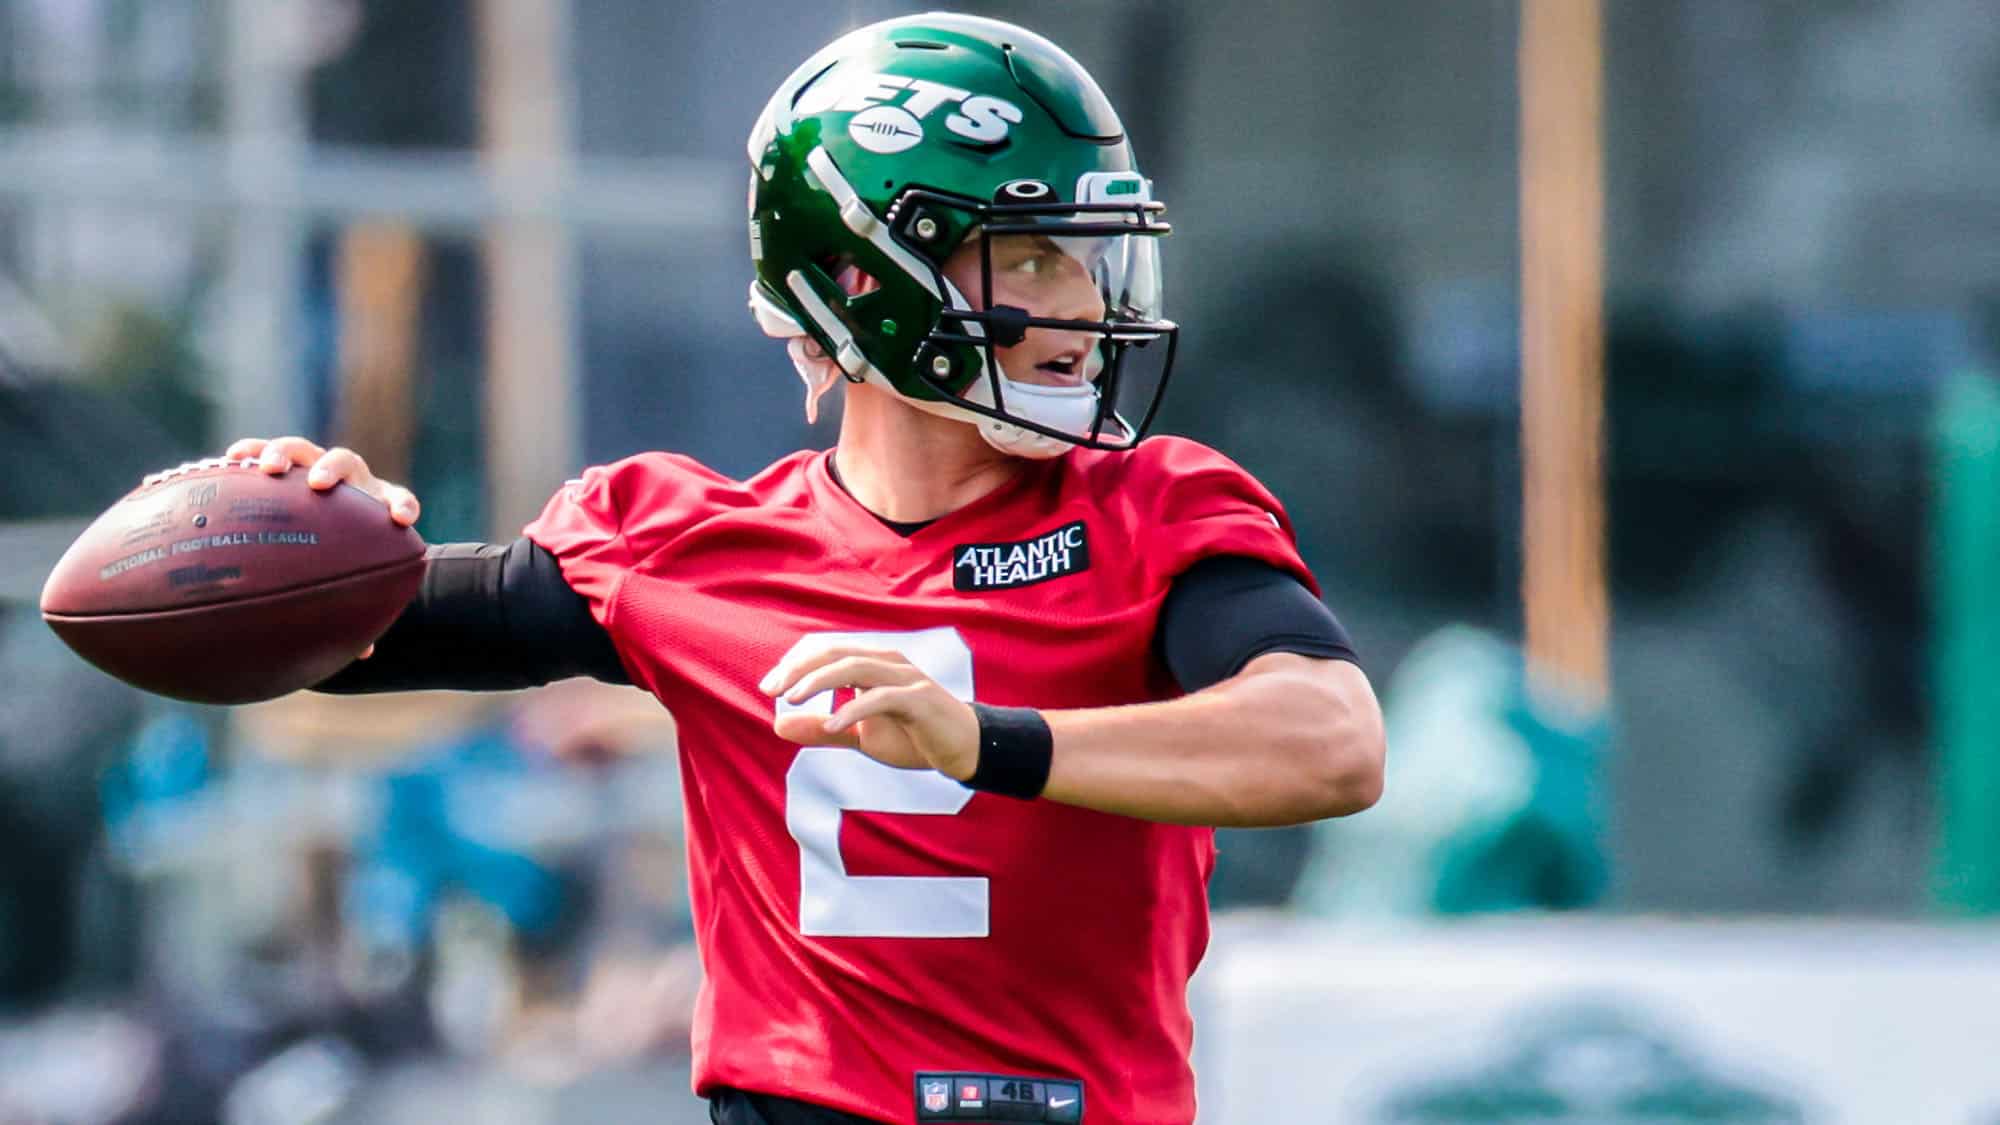 Zach Wilson had a good training camp practice on Thursday as he prepares for the NY Jets' preseason game against the NY Giants to open 2021.